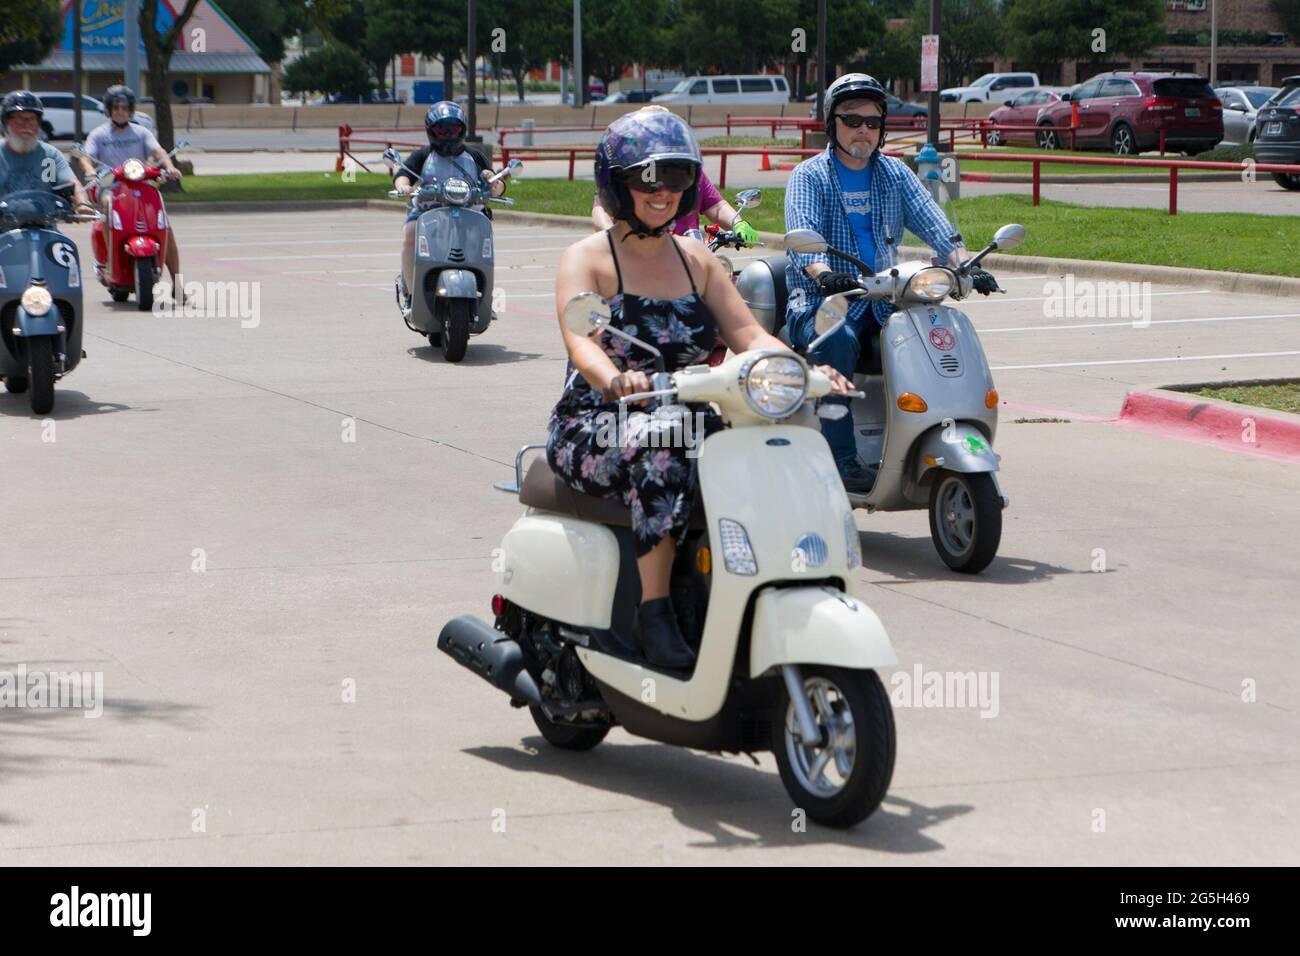 Plano, USA. 27th June, 2021. People ride Vespa during the National Vespa Parade Day in Plano, Texas, the United States, on June 27, 2021. Nearly 50 Vespa enthusiasts participated in a Vespa parade in Plano on Sunday. Credit: Dan Tian/Xinhua/Alamy Live News Stock Photo